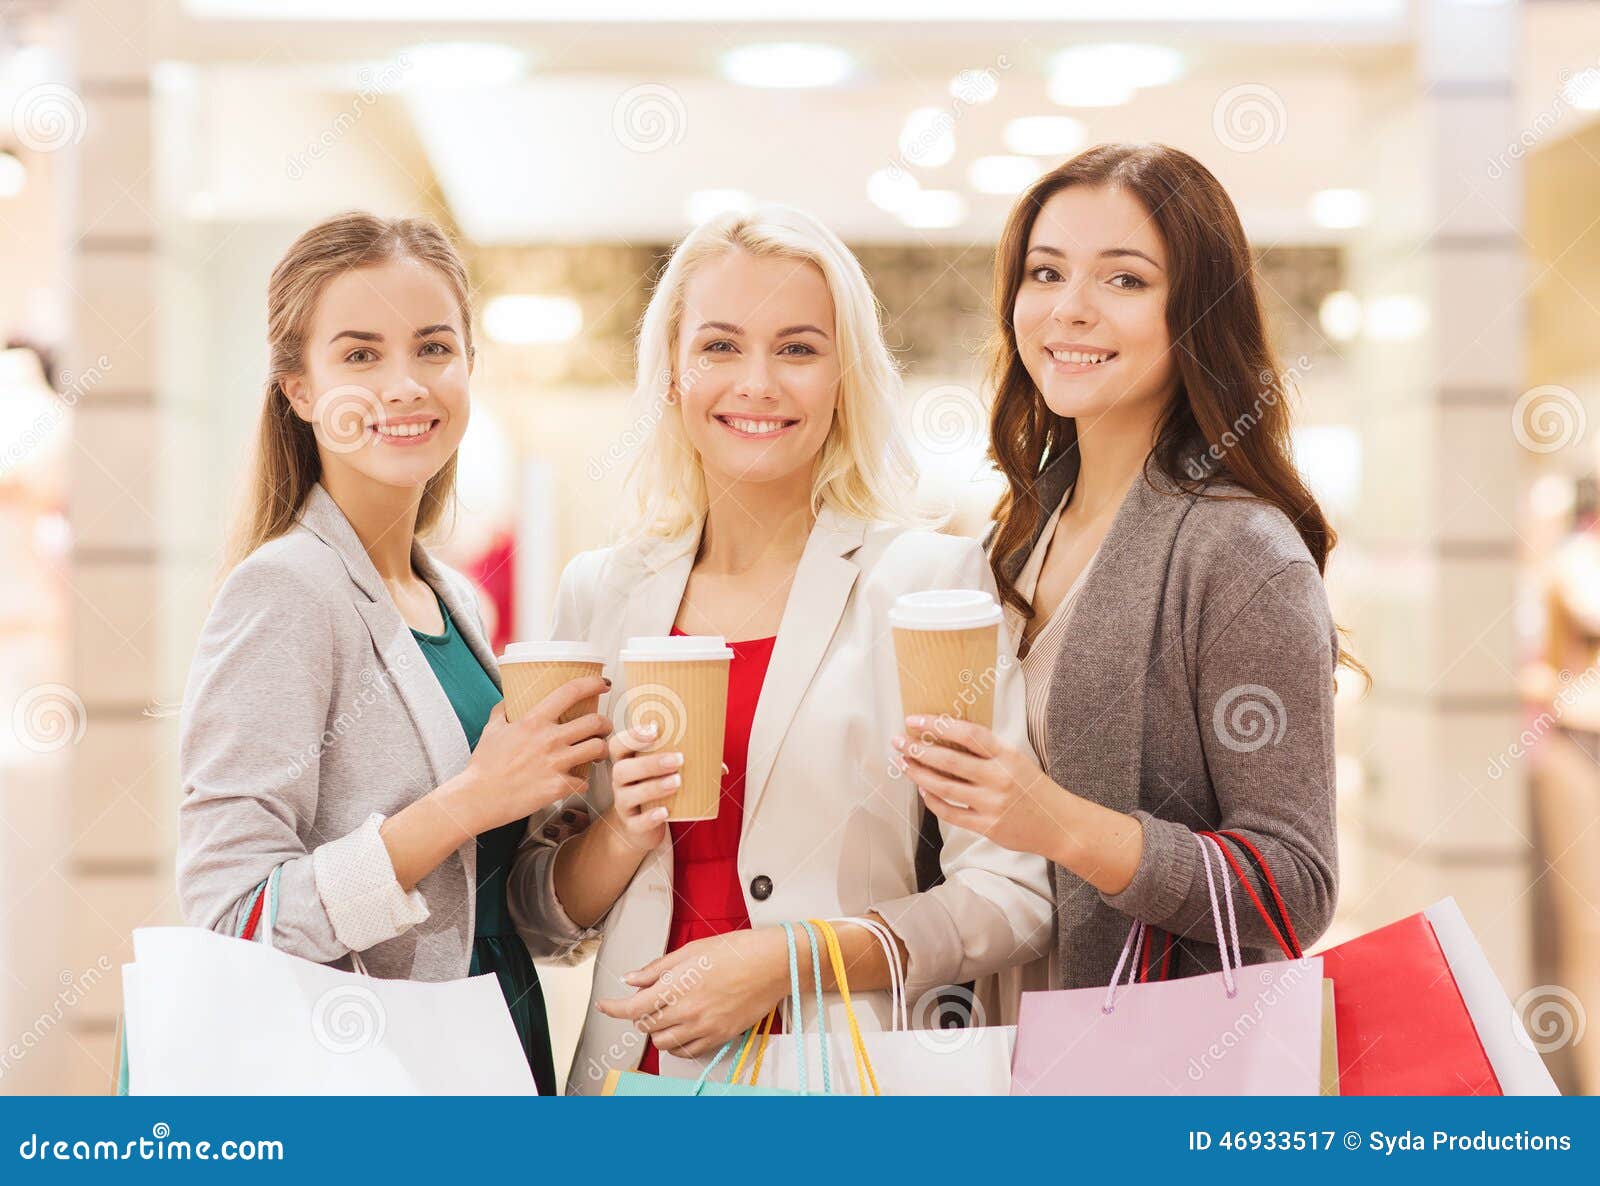 Young Women with Shopping Bags and Coffee in Mall Stock Image - Image ...